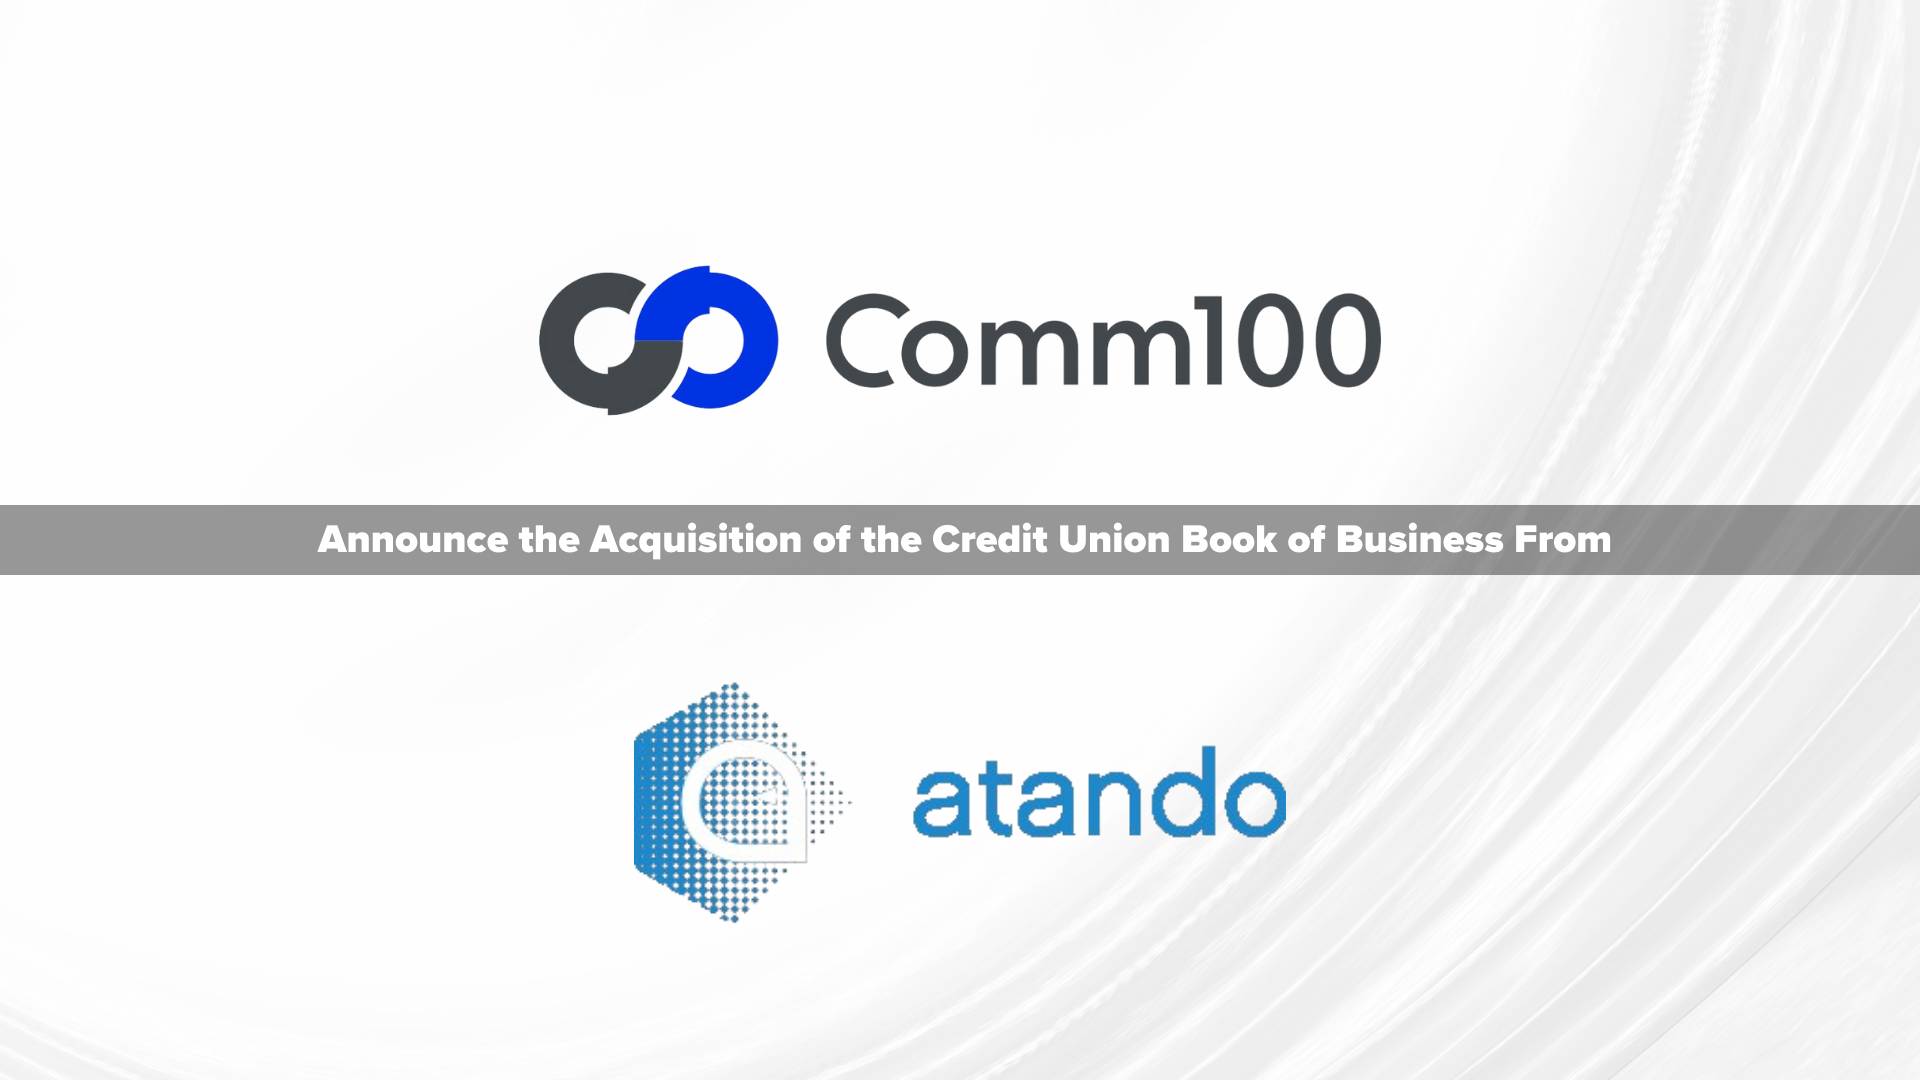 Comm100 Acquires Atando Technologies' Credit Union Portfolio to Strengthen Market Position and Commitment